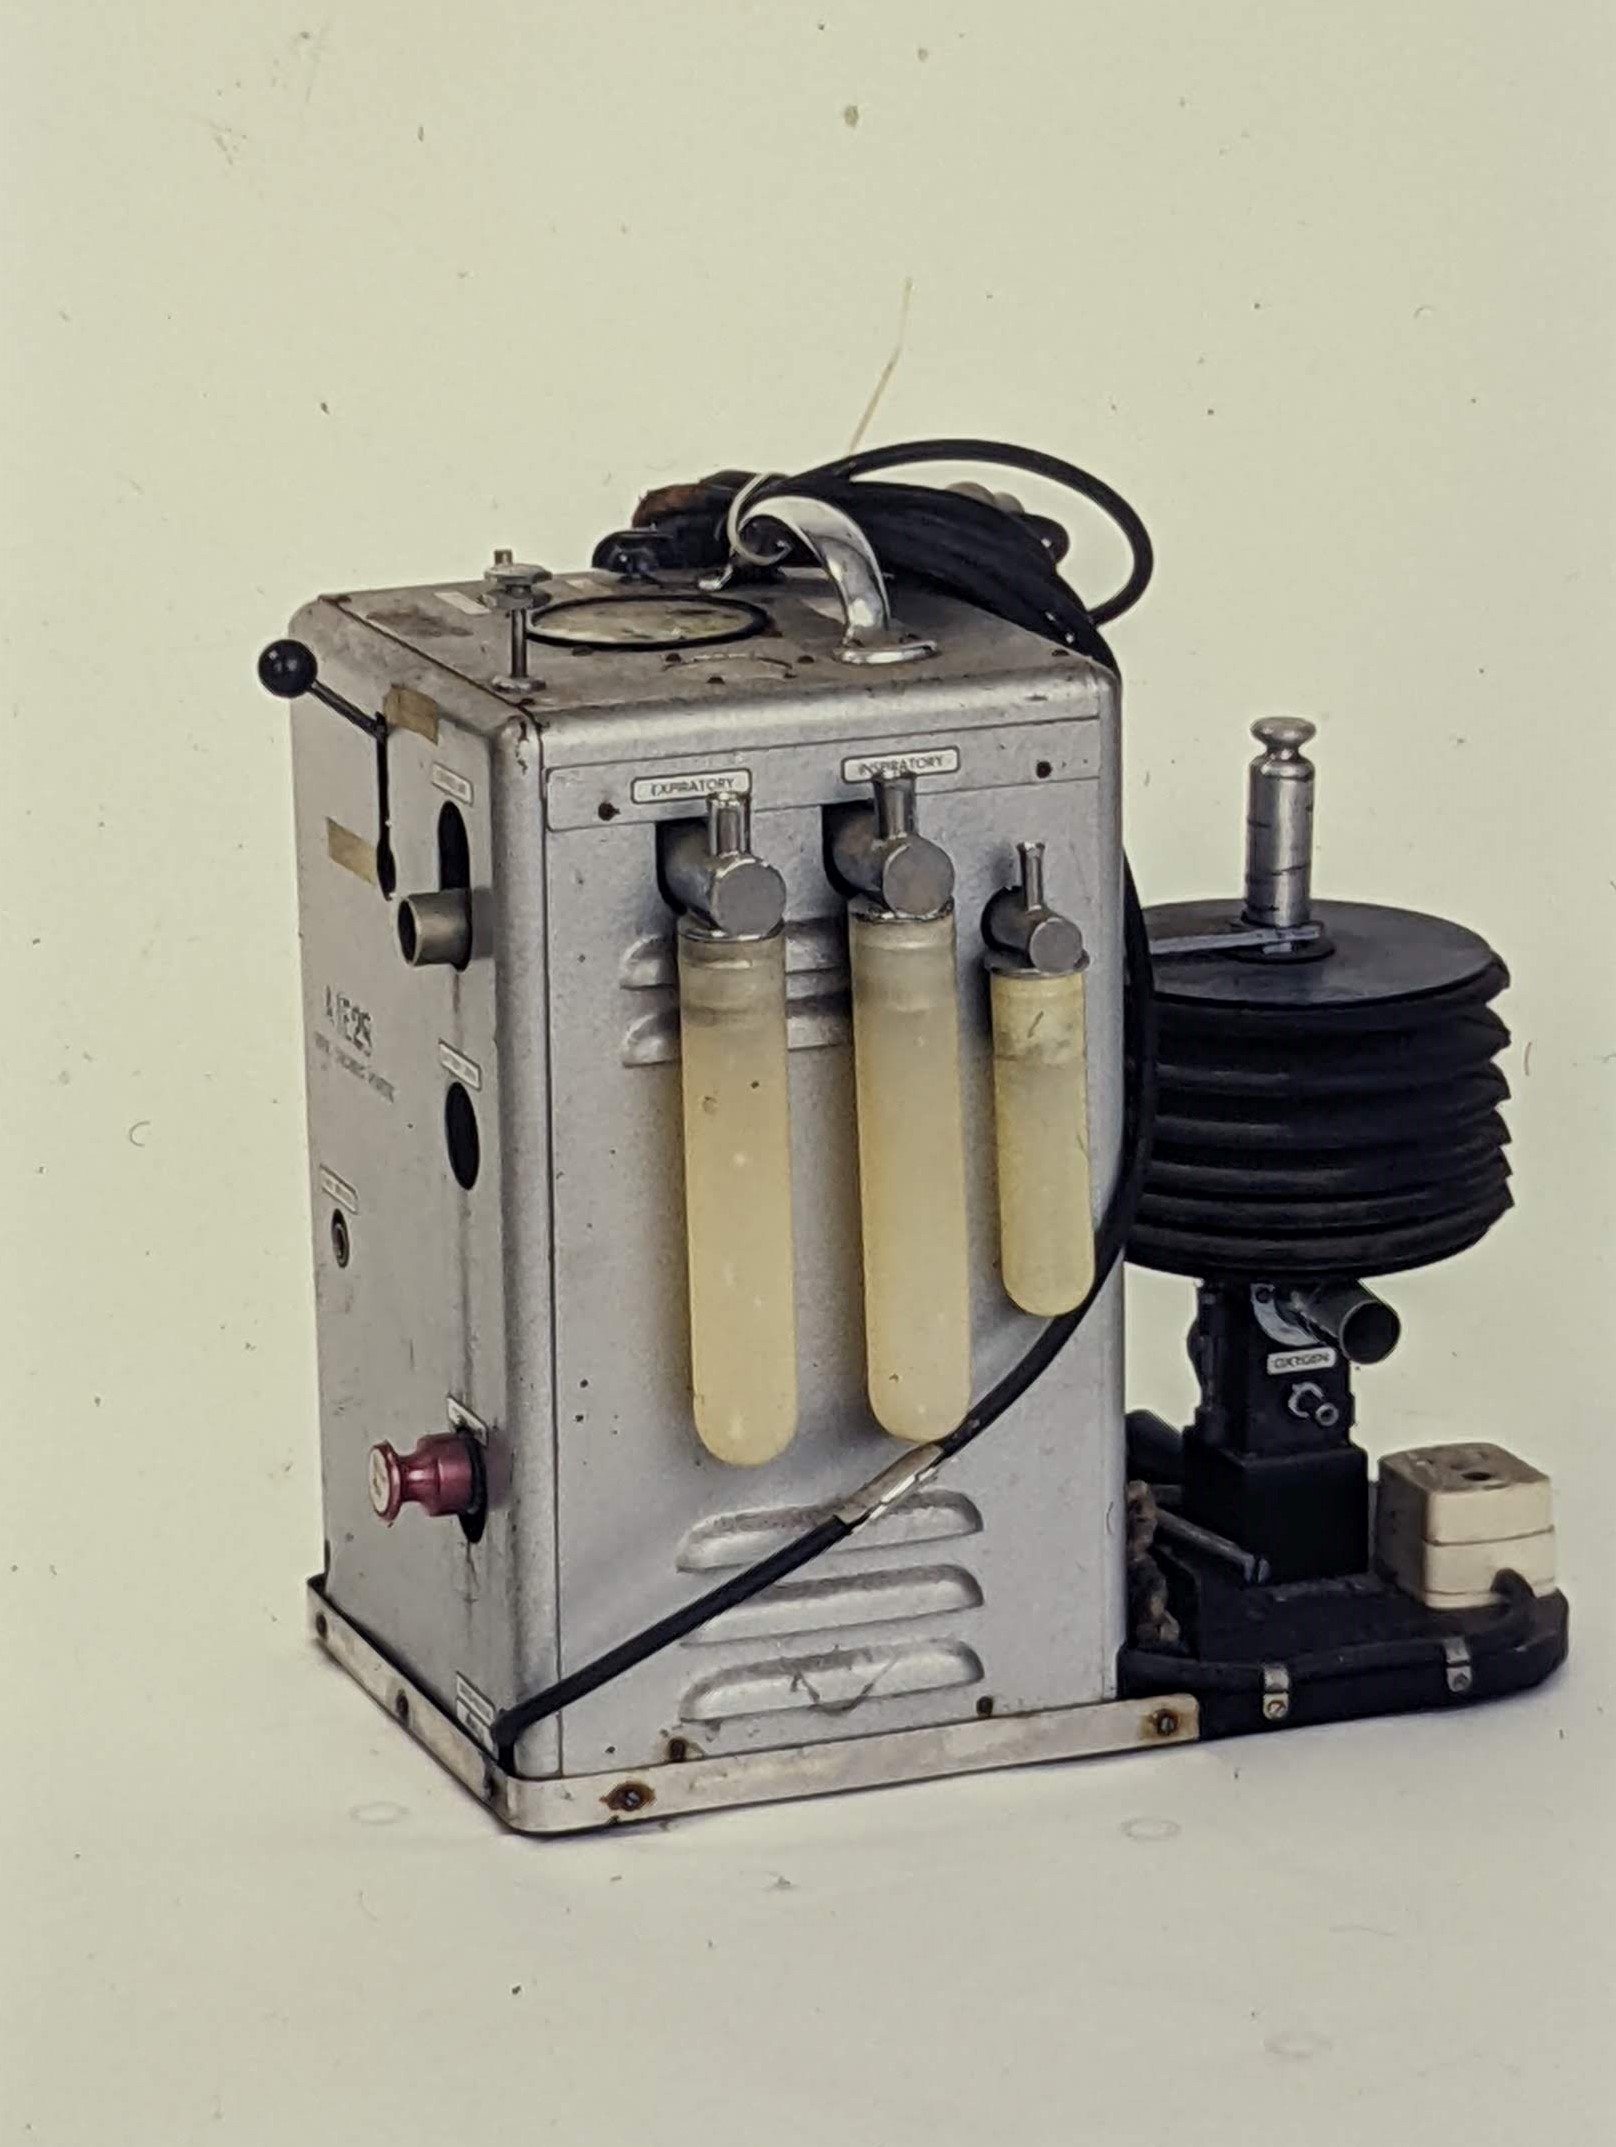 Mechanical bellows respirator, similar to the model improvised by Dr Jackson.